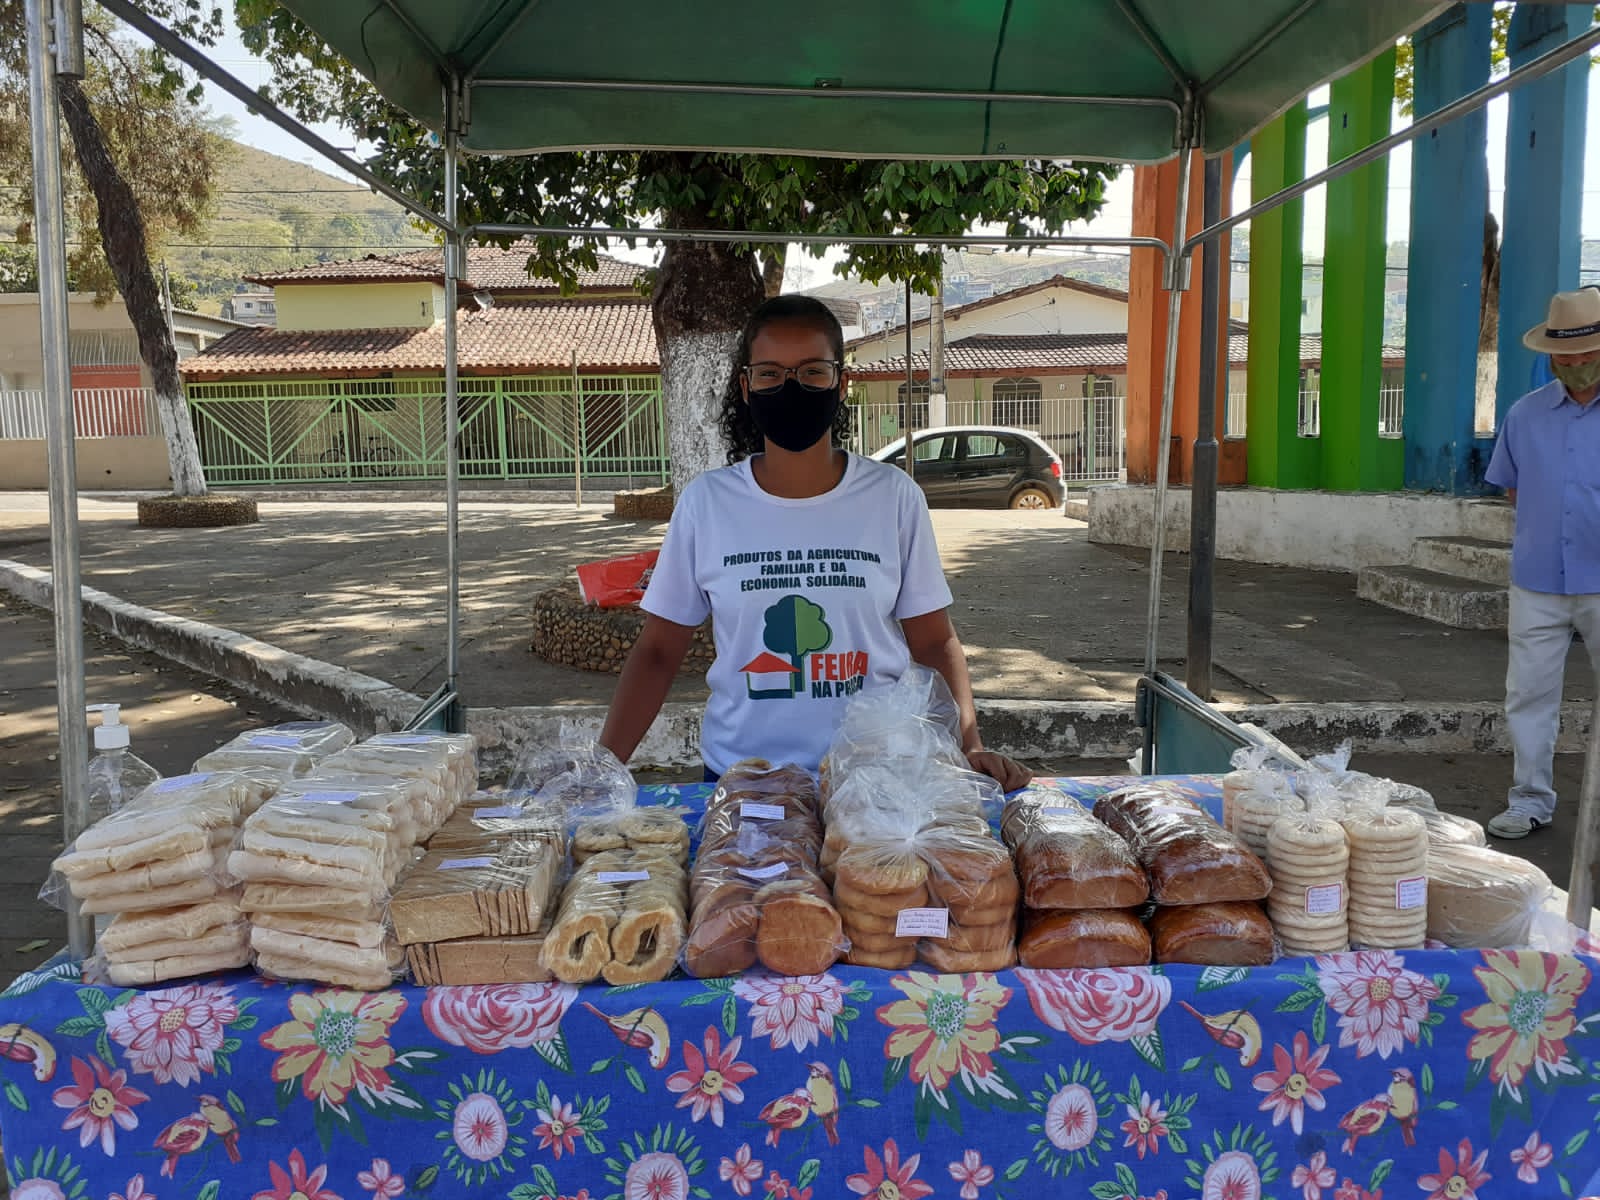 Mariana sells baked goods in her rural community in Brazil